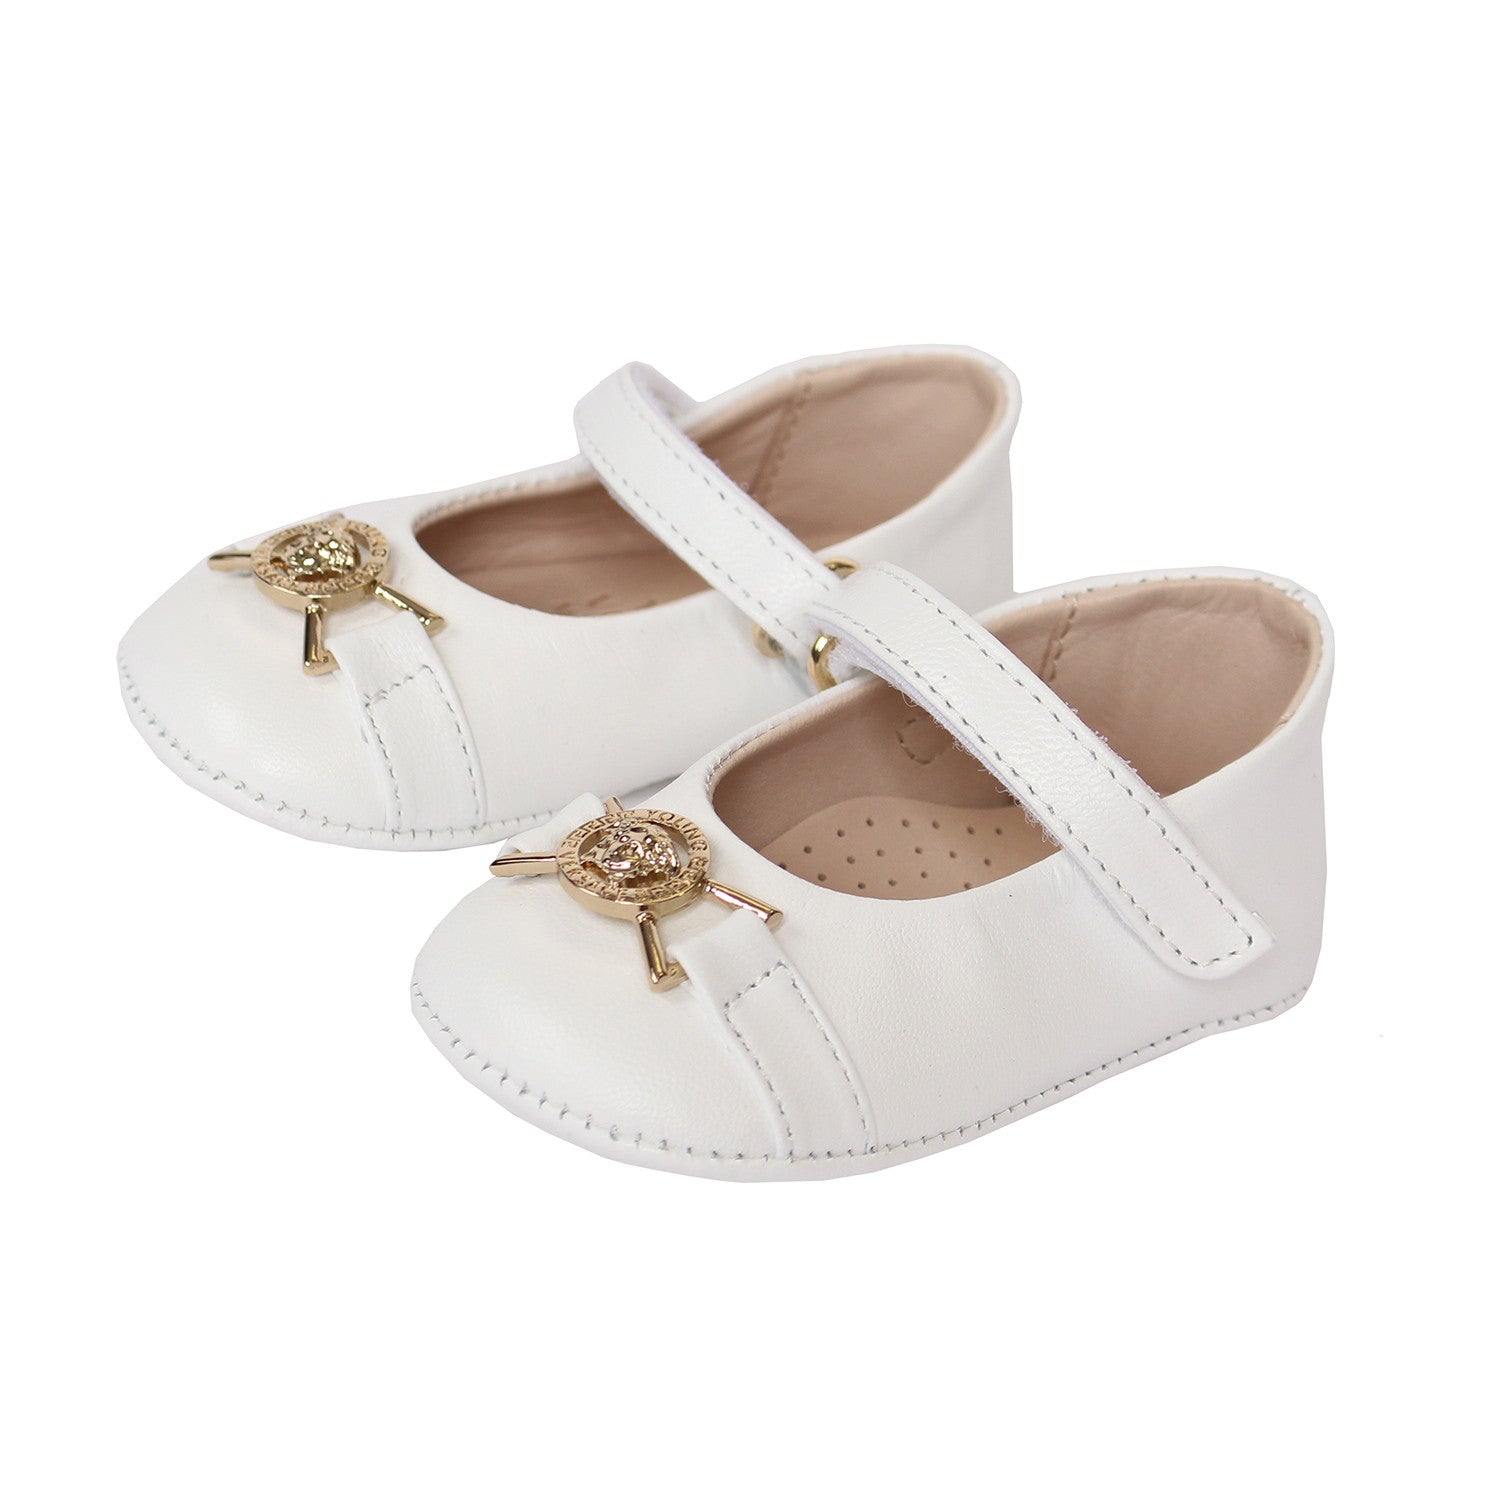 Baby Girls Crib Shoes-White and Gold